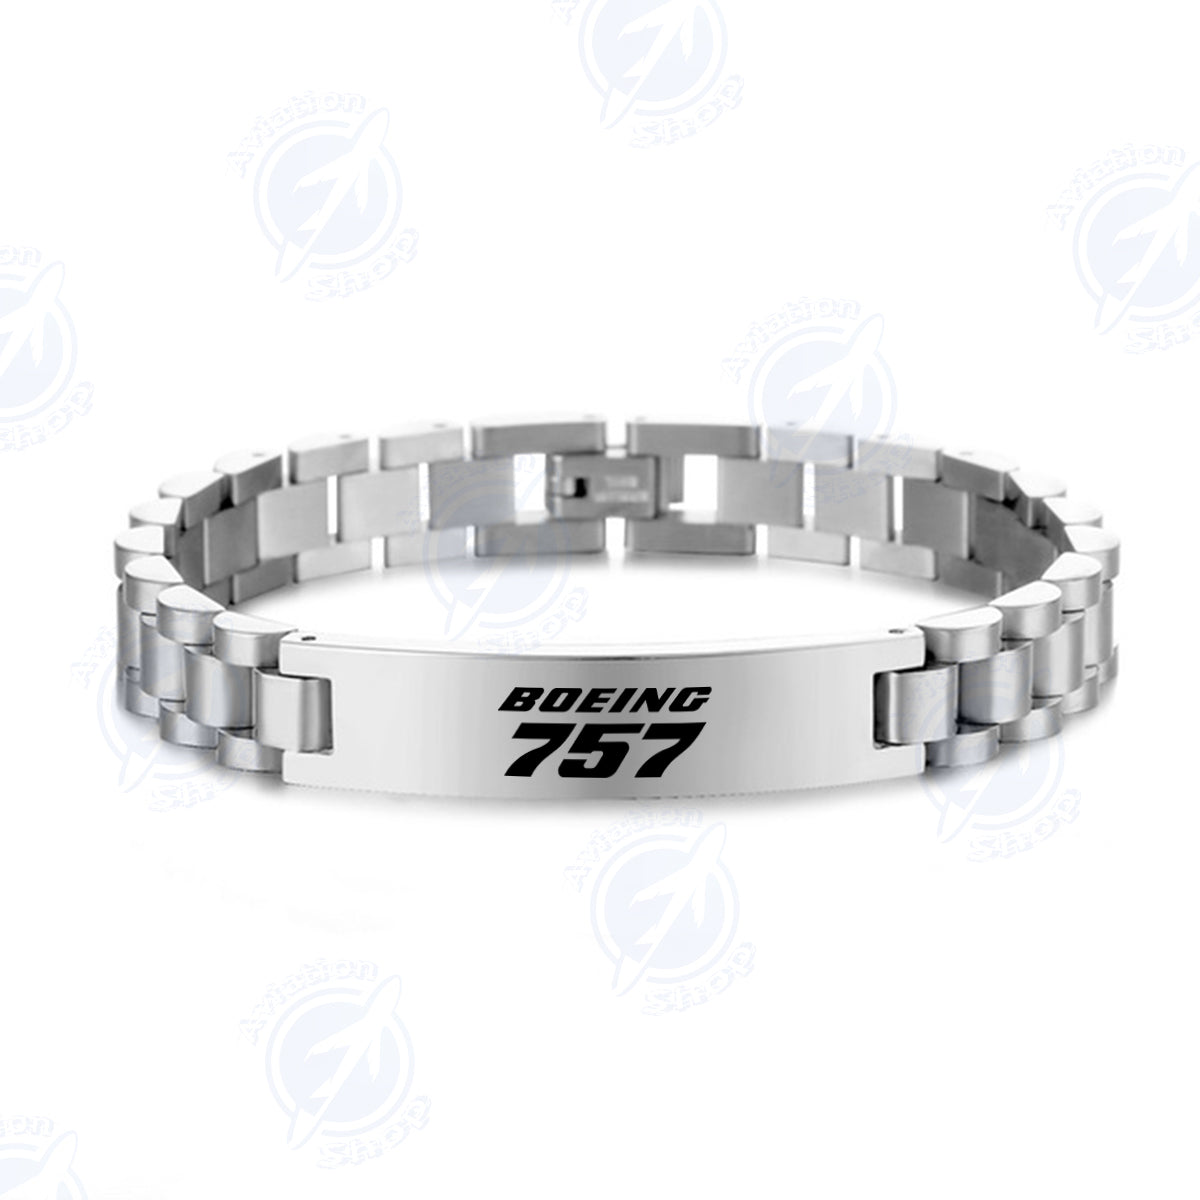 Boeing 757 & Text Designed Stainless Steel Chain Bracelets